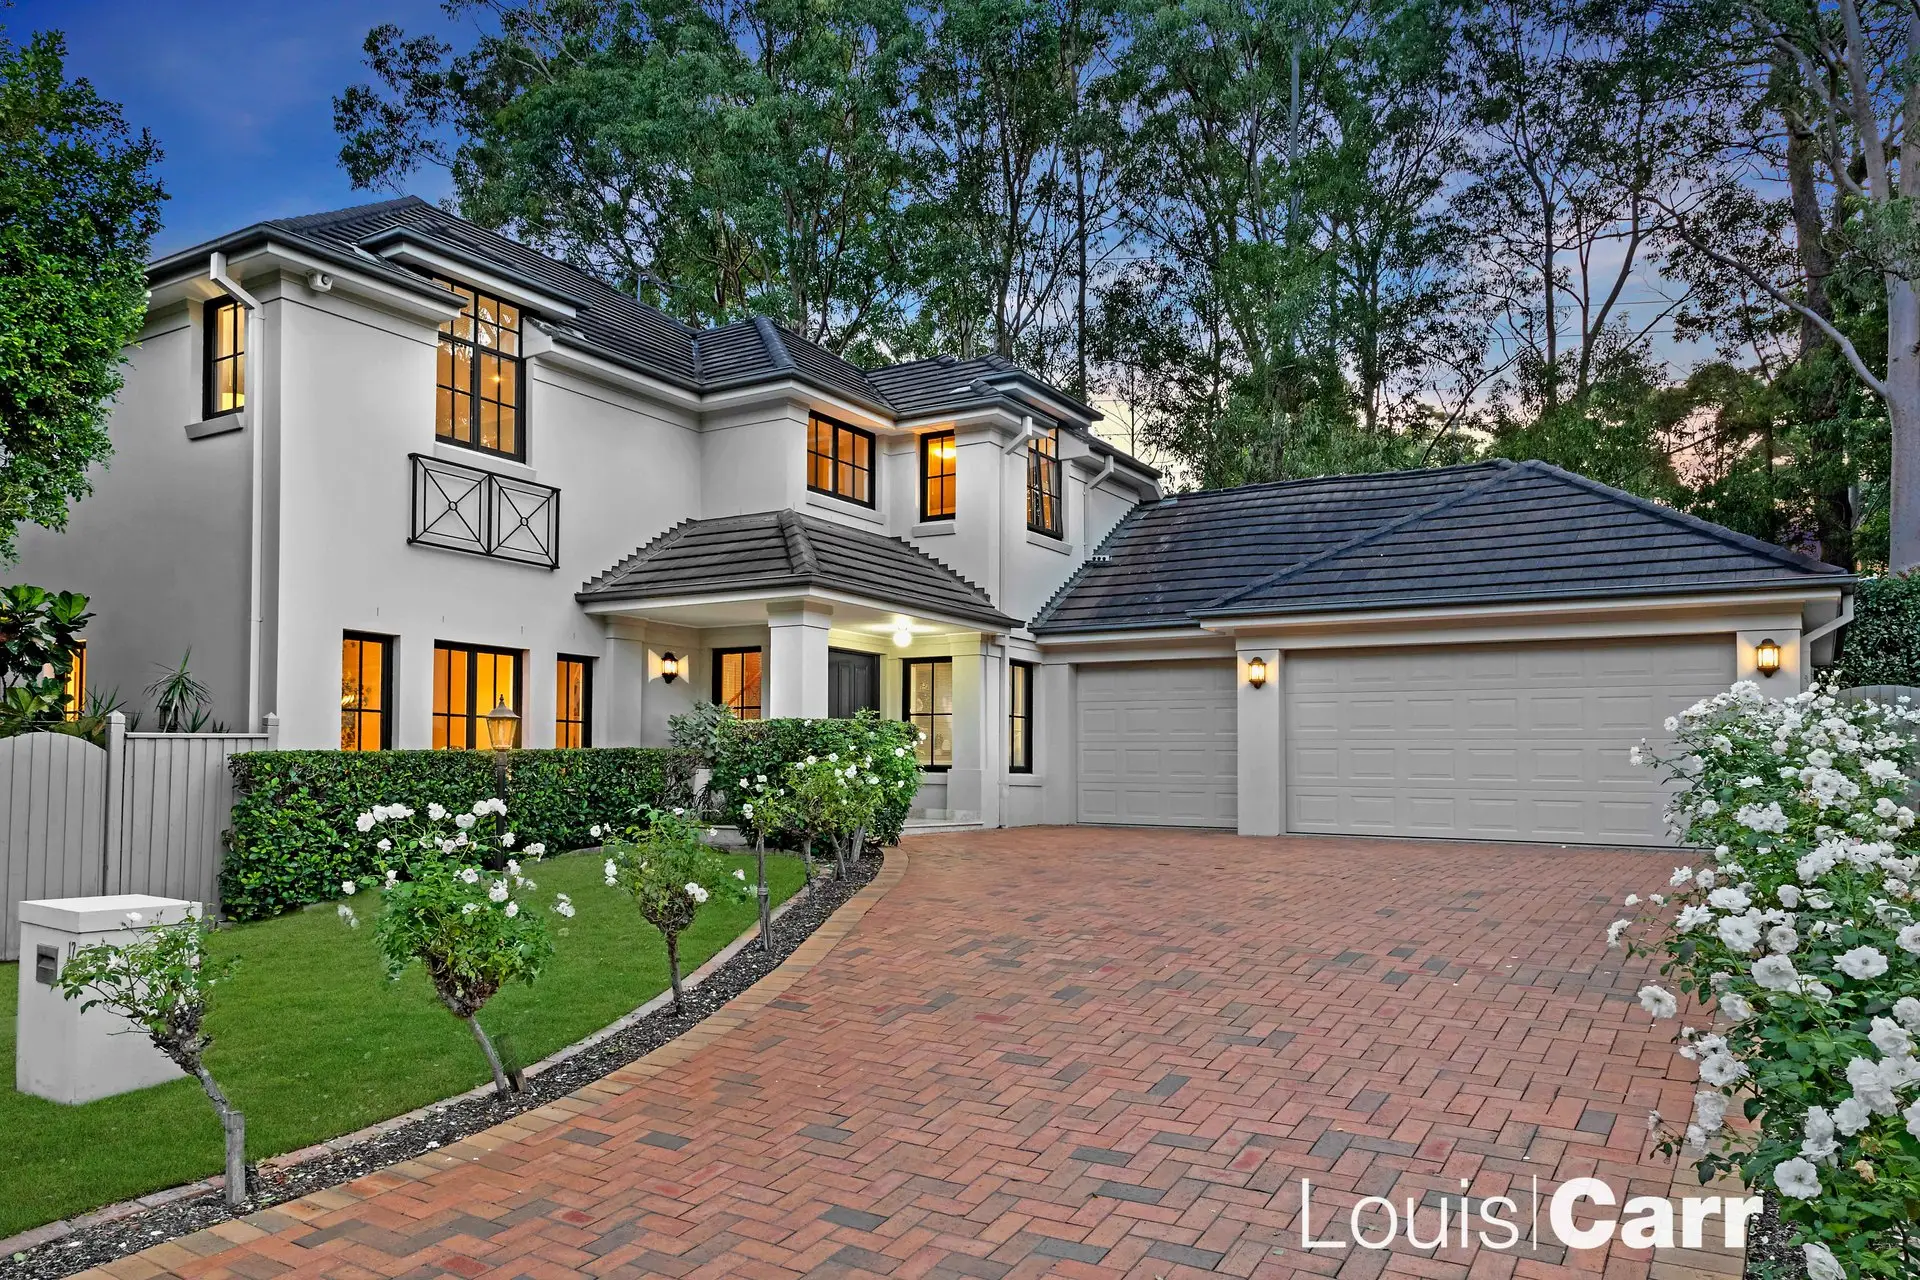 Photo #1: 17 Compton Green, West Pennant Hills - Sold by Louis Carr Real Estate